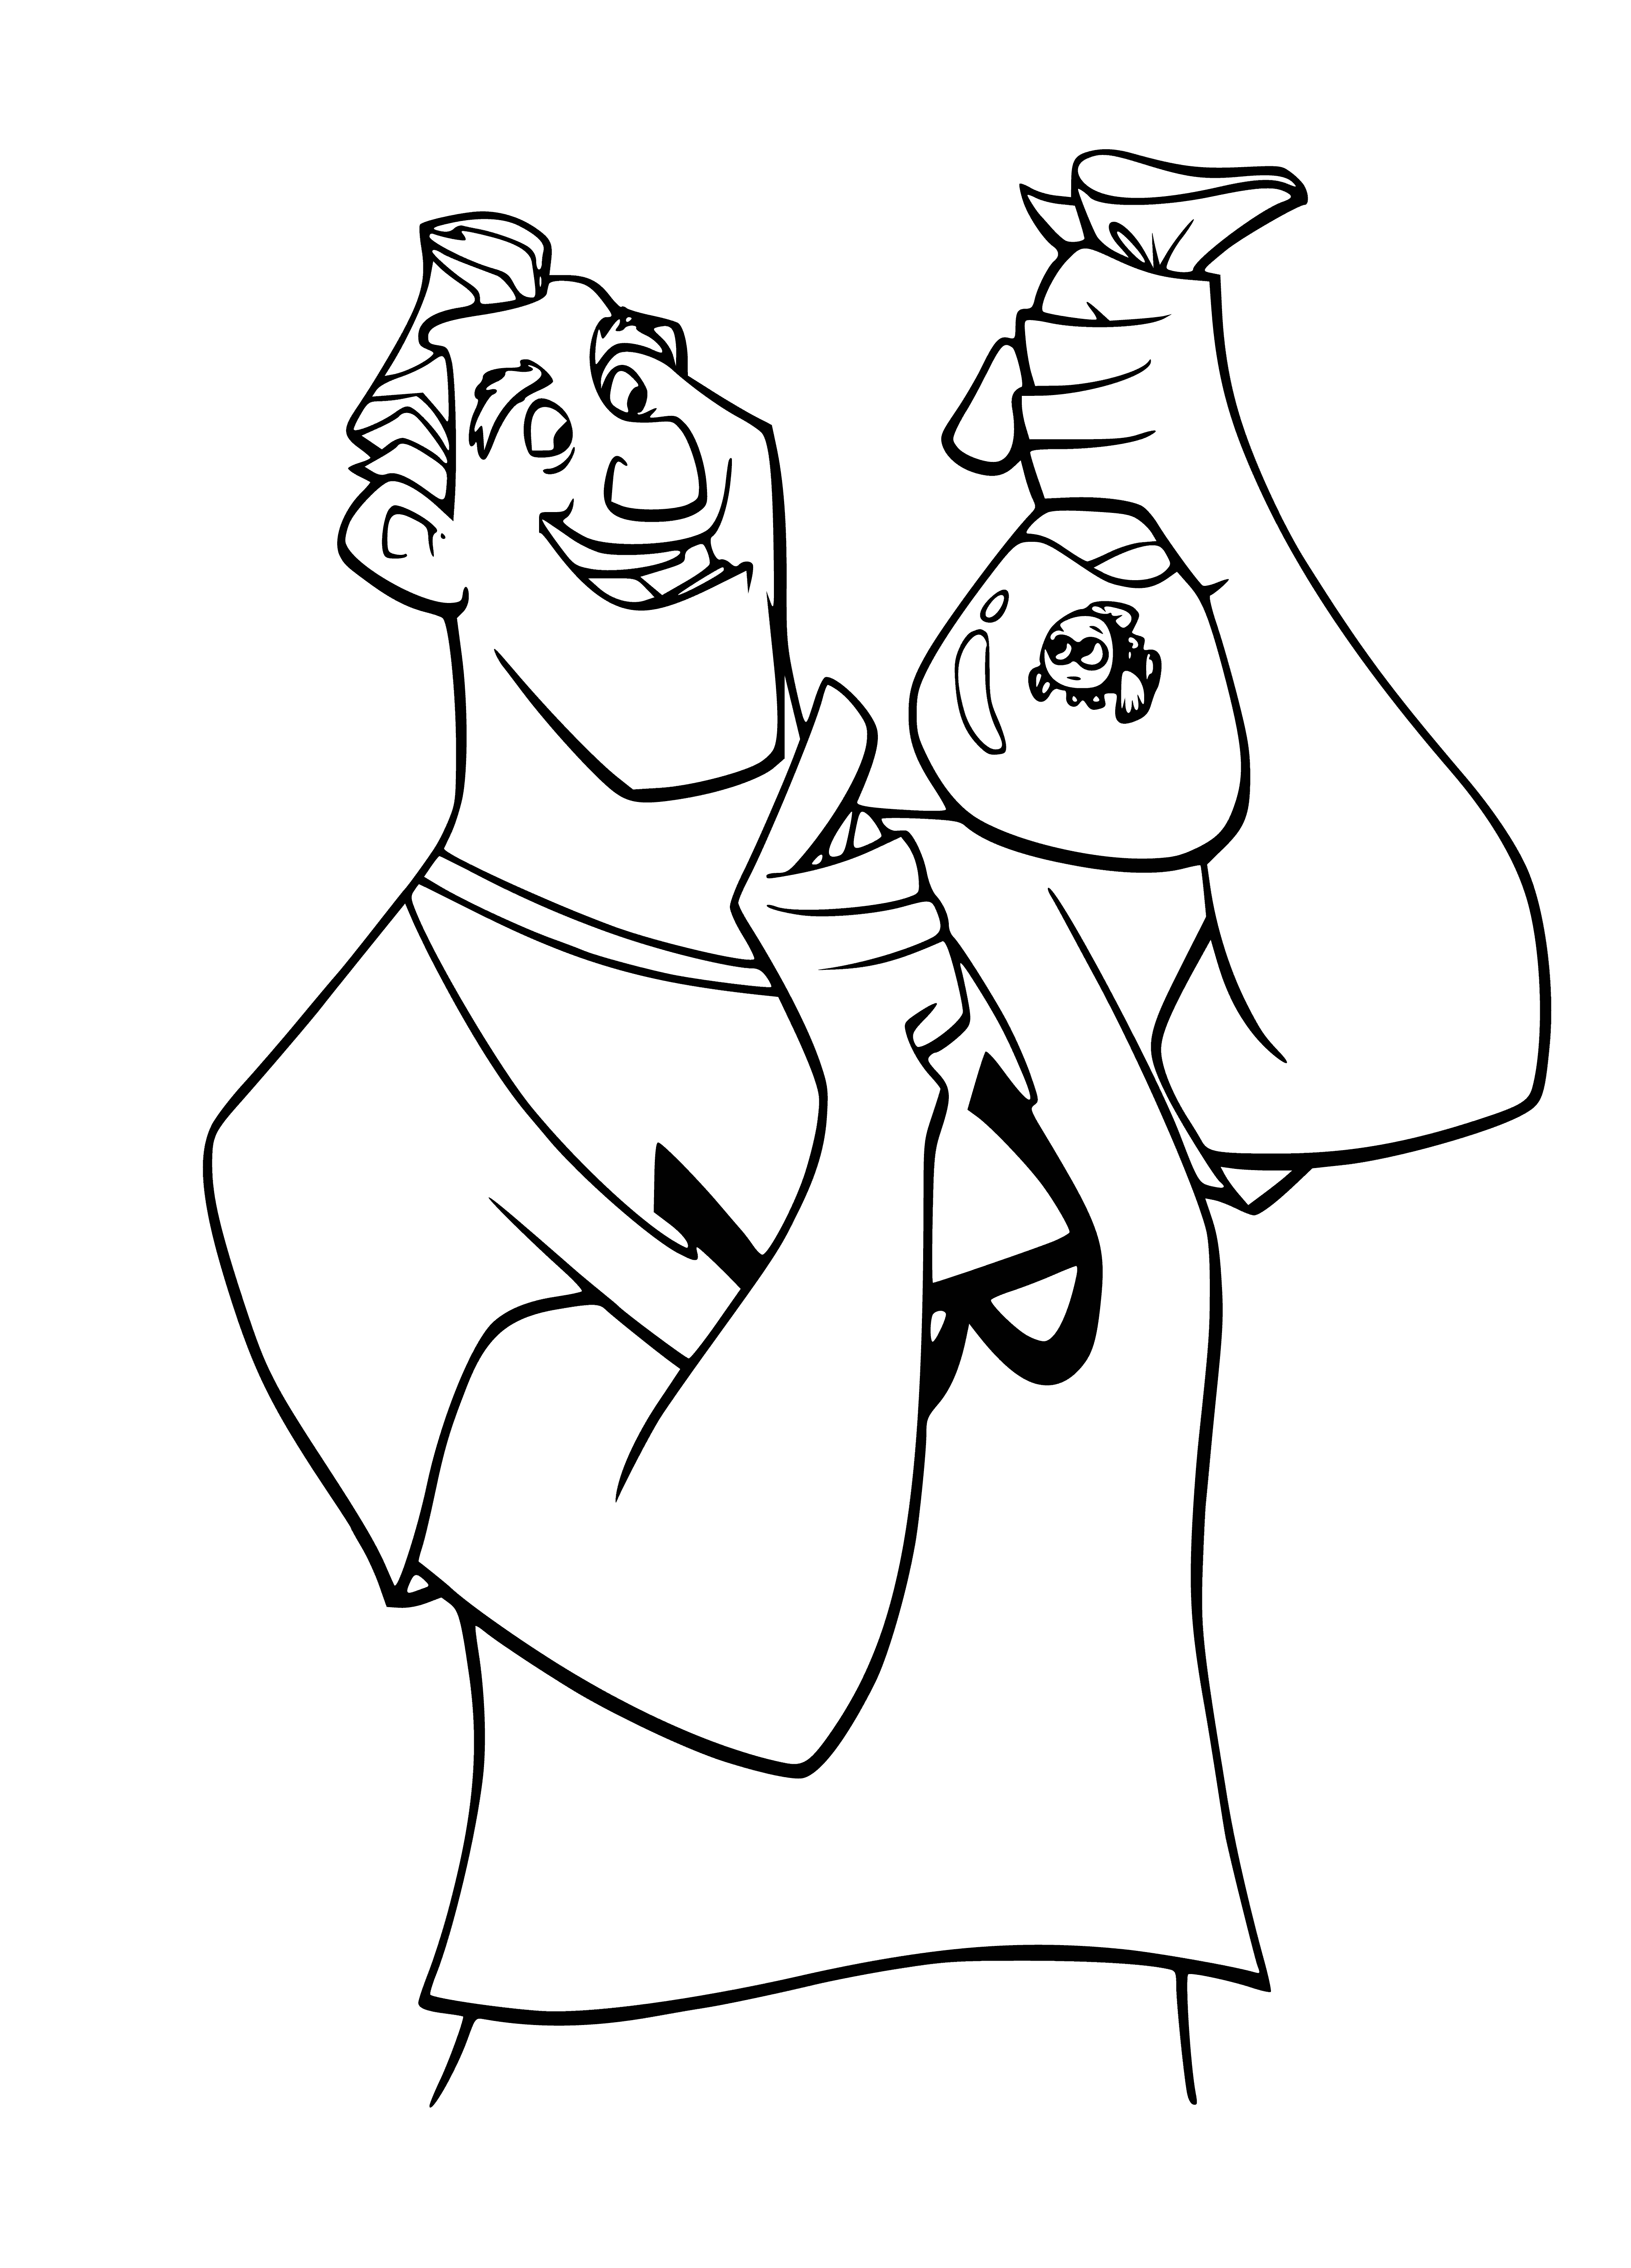 Dentist and Nemo coloring page